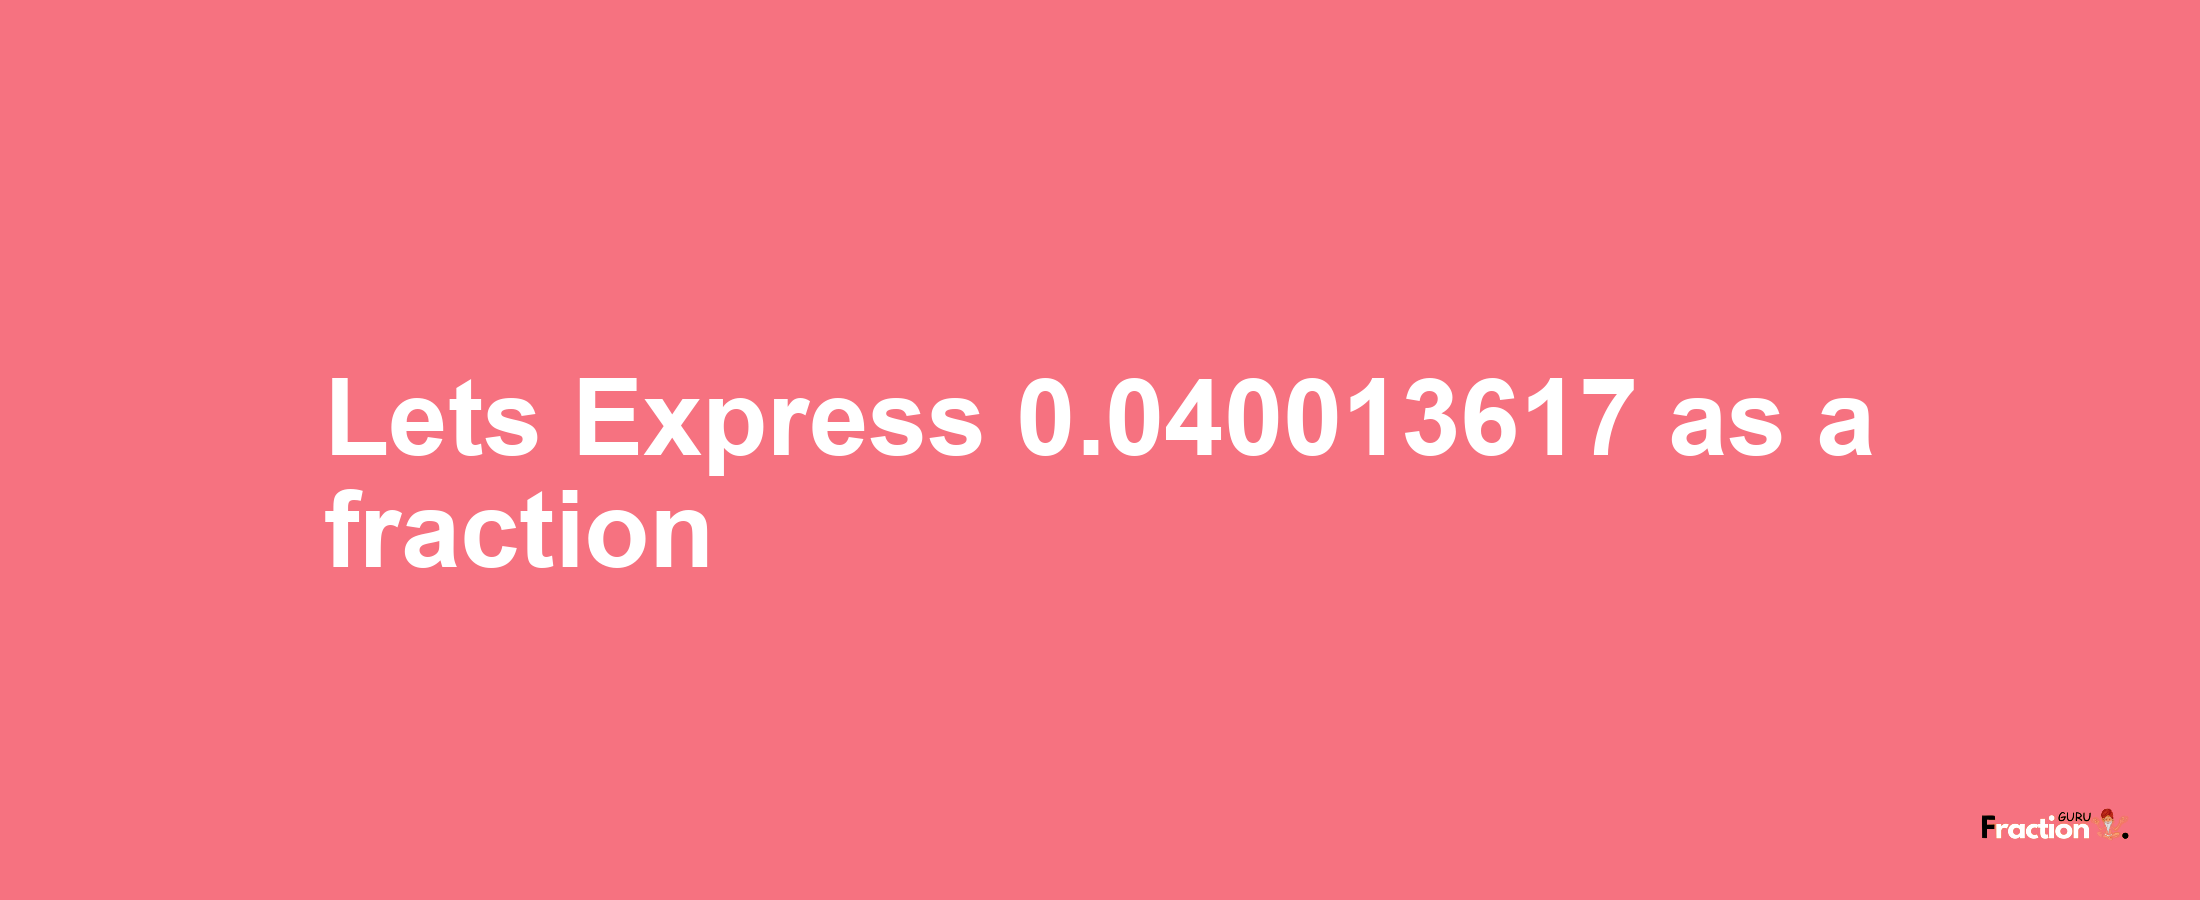 Lets Express 0.040013617 as afraction